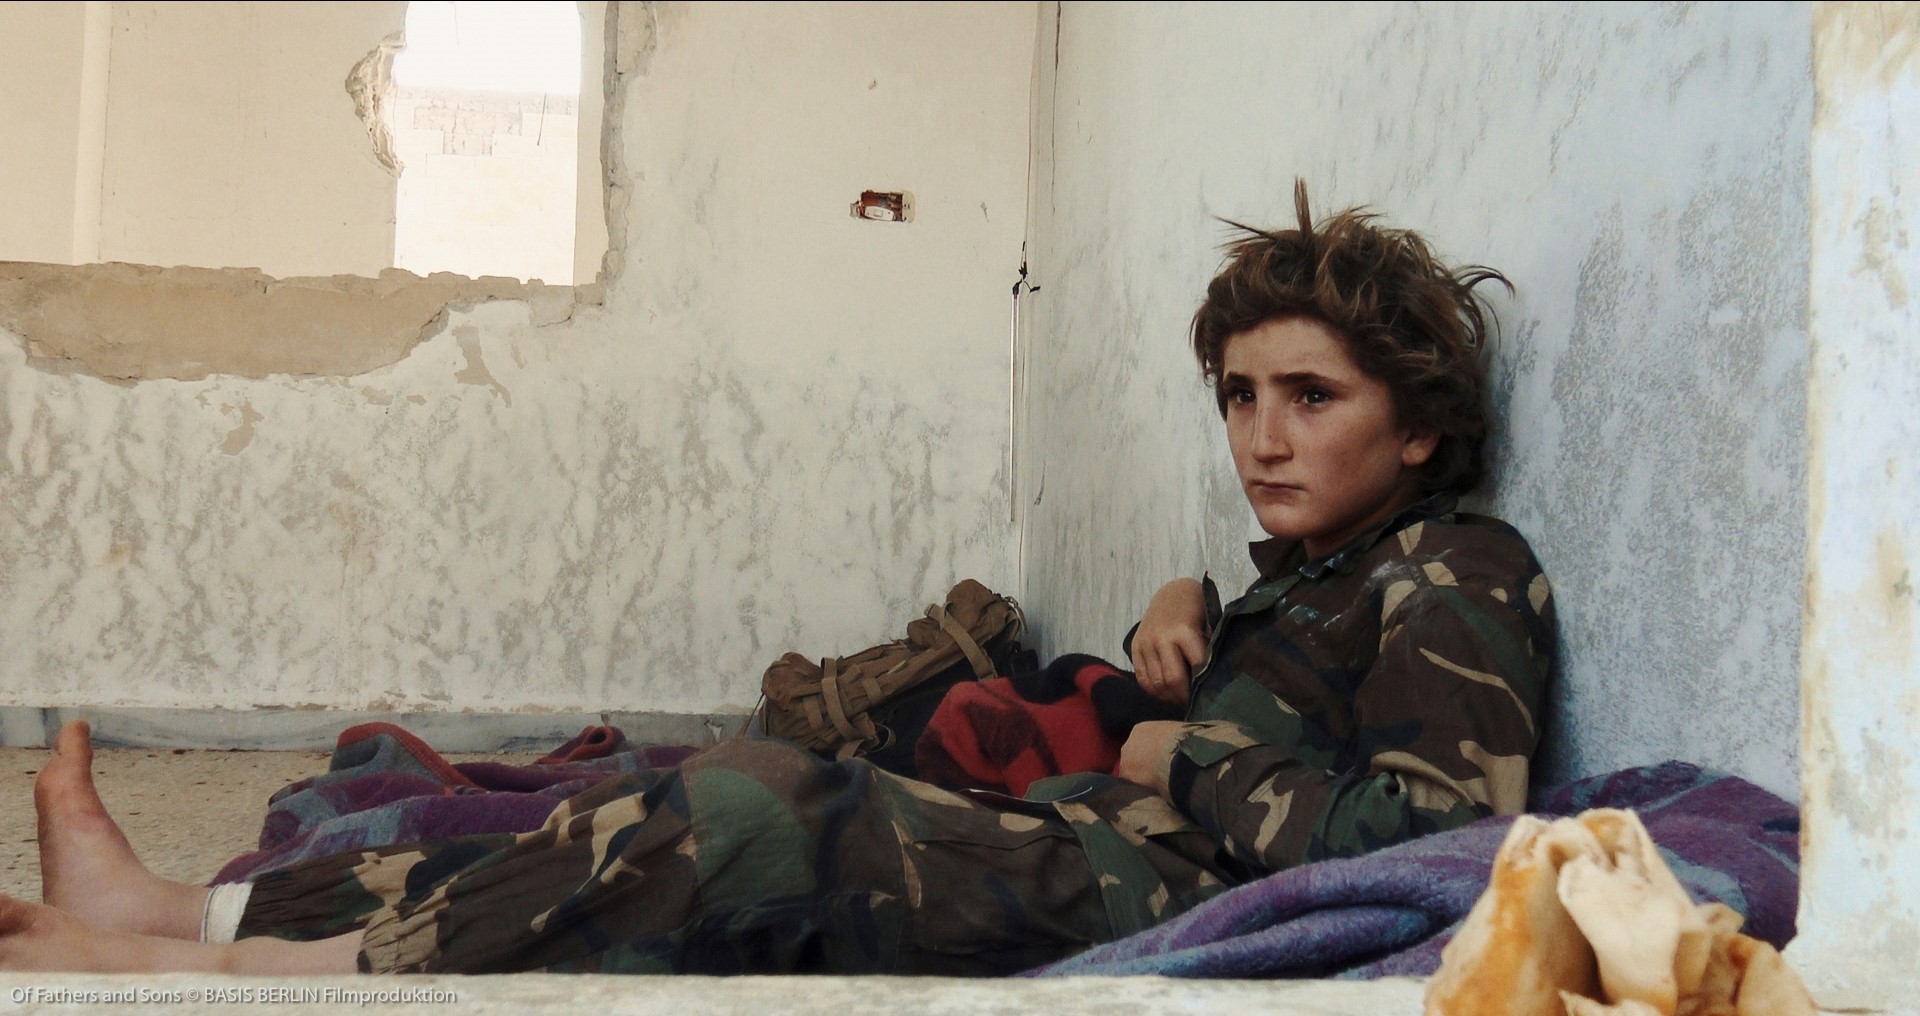 Twelve-year-old Osama in a military camp. He is one of many recruits trained for the “holy war”.